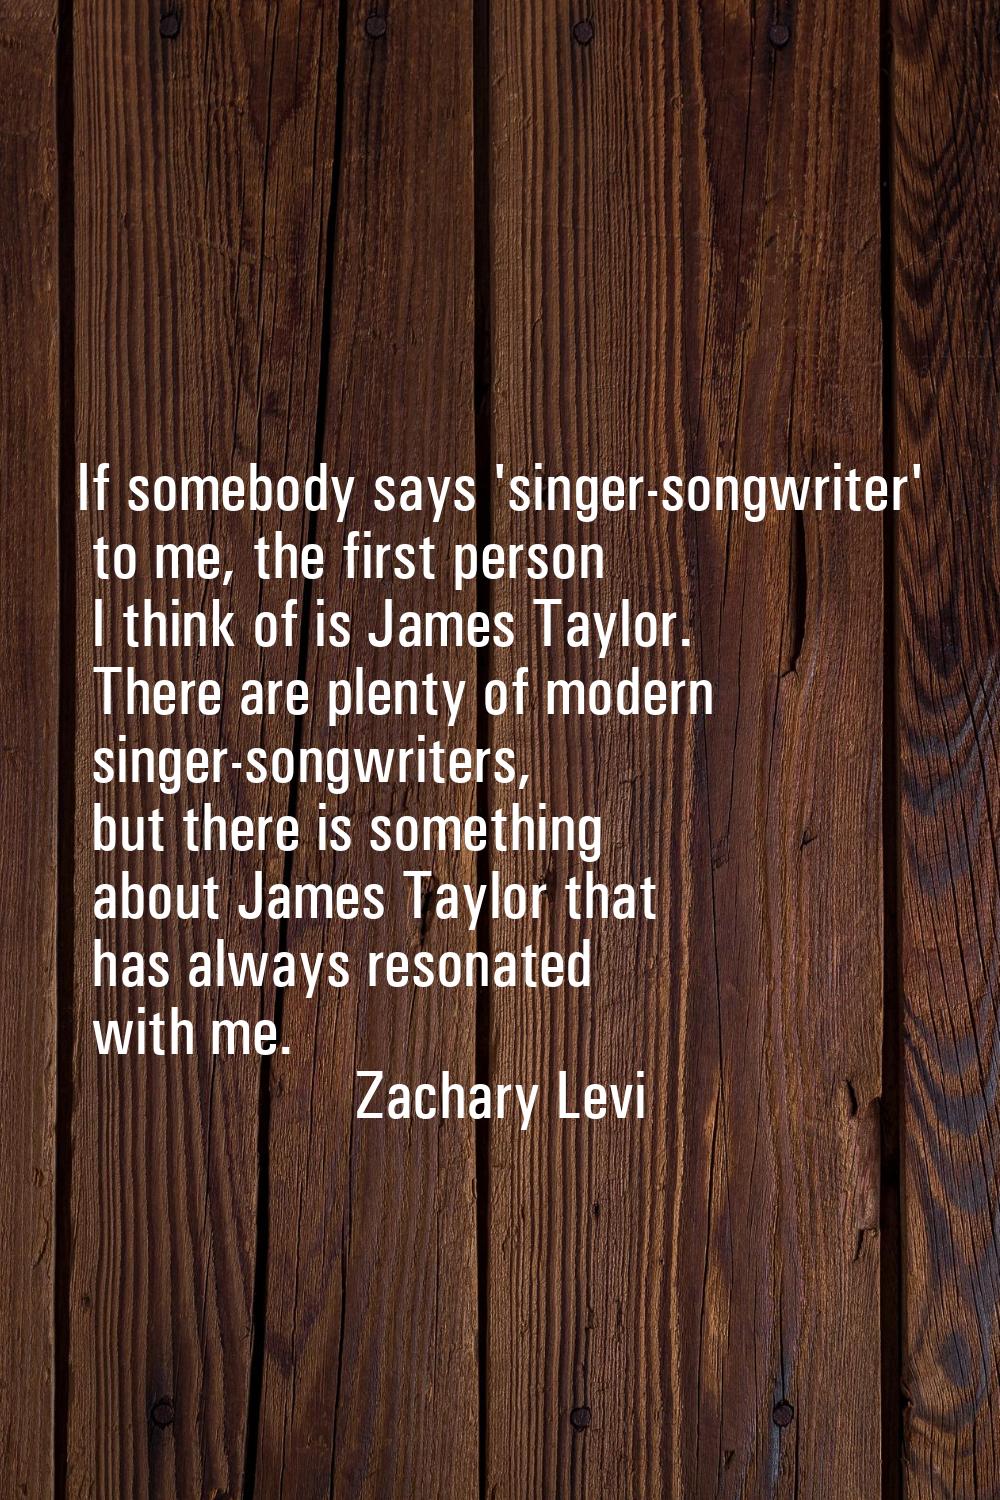 If somebody says 'singer-songwriter' to me, the first person I think of is James Taylor. There are 